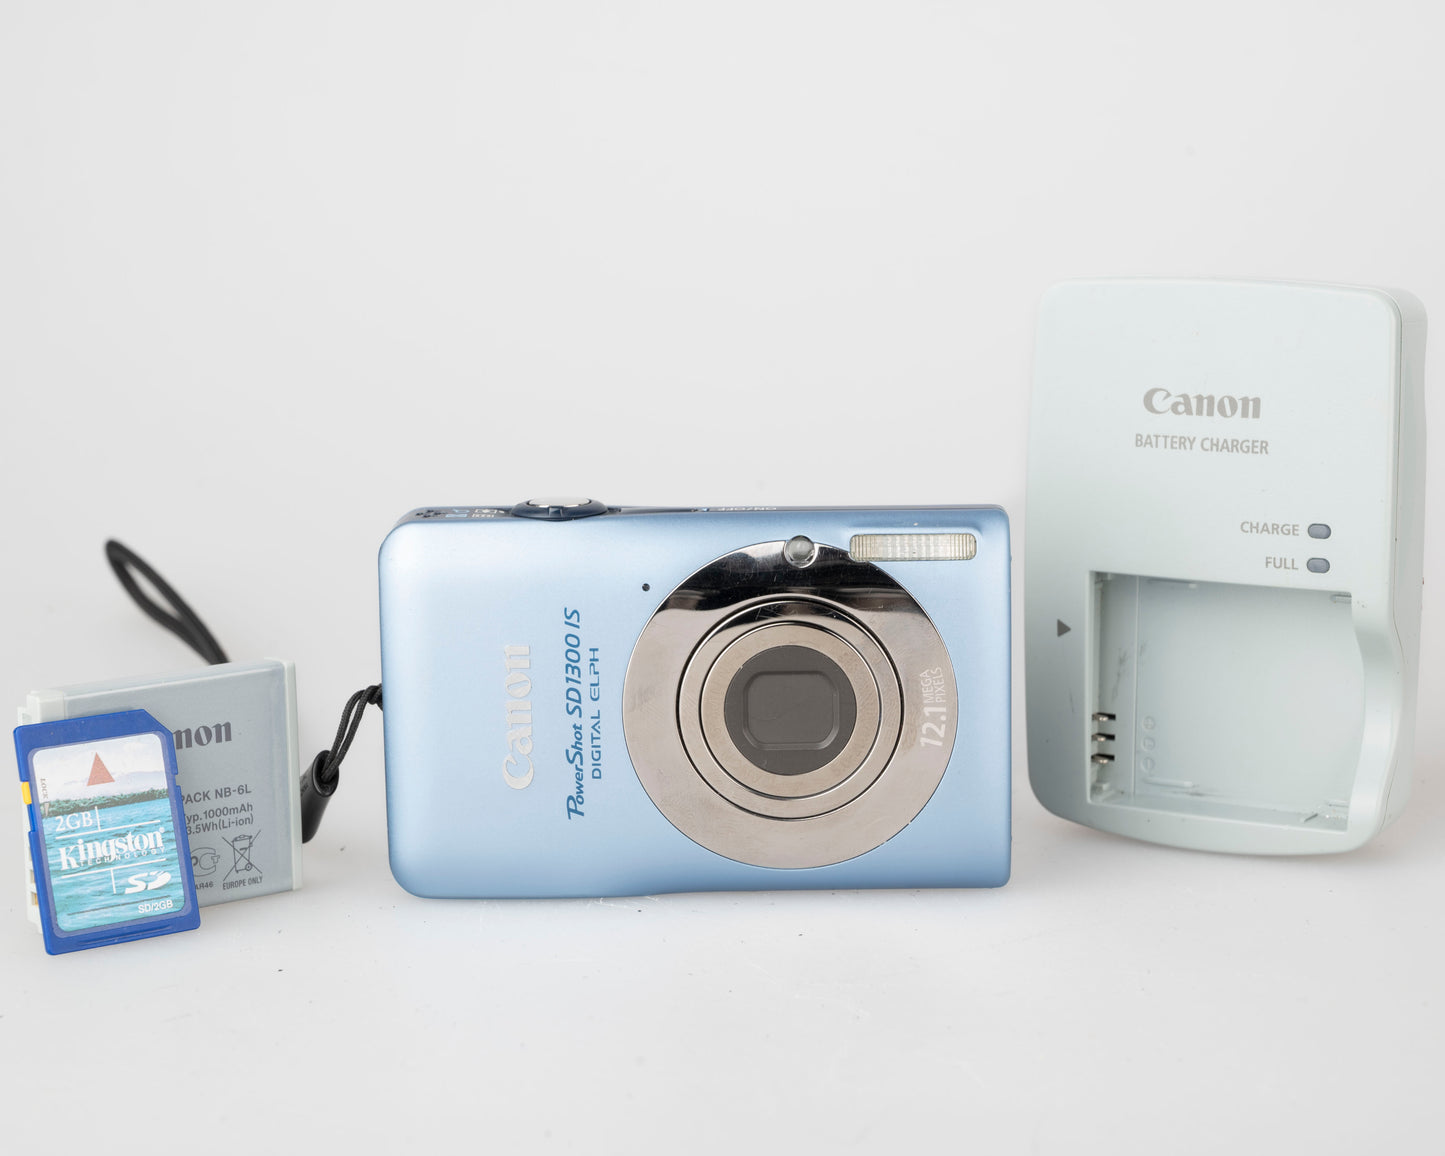 Canon Powershot SD1300 IS digicam w/ 12 MP.1 CCD sensor w/ 2GB SD card + battery + charger